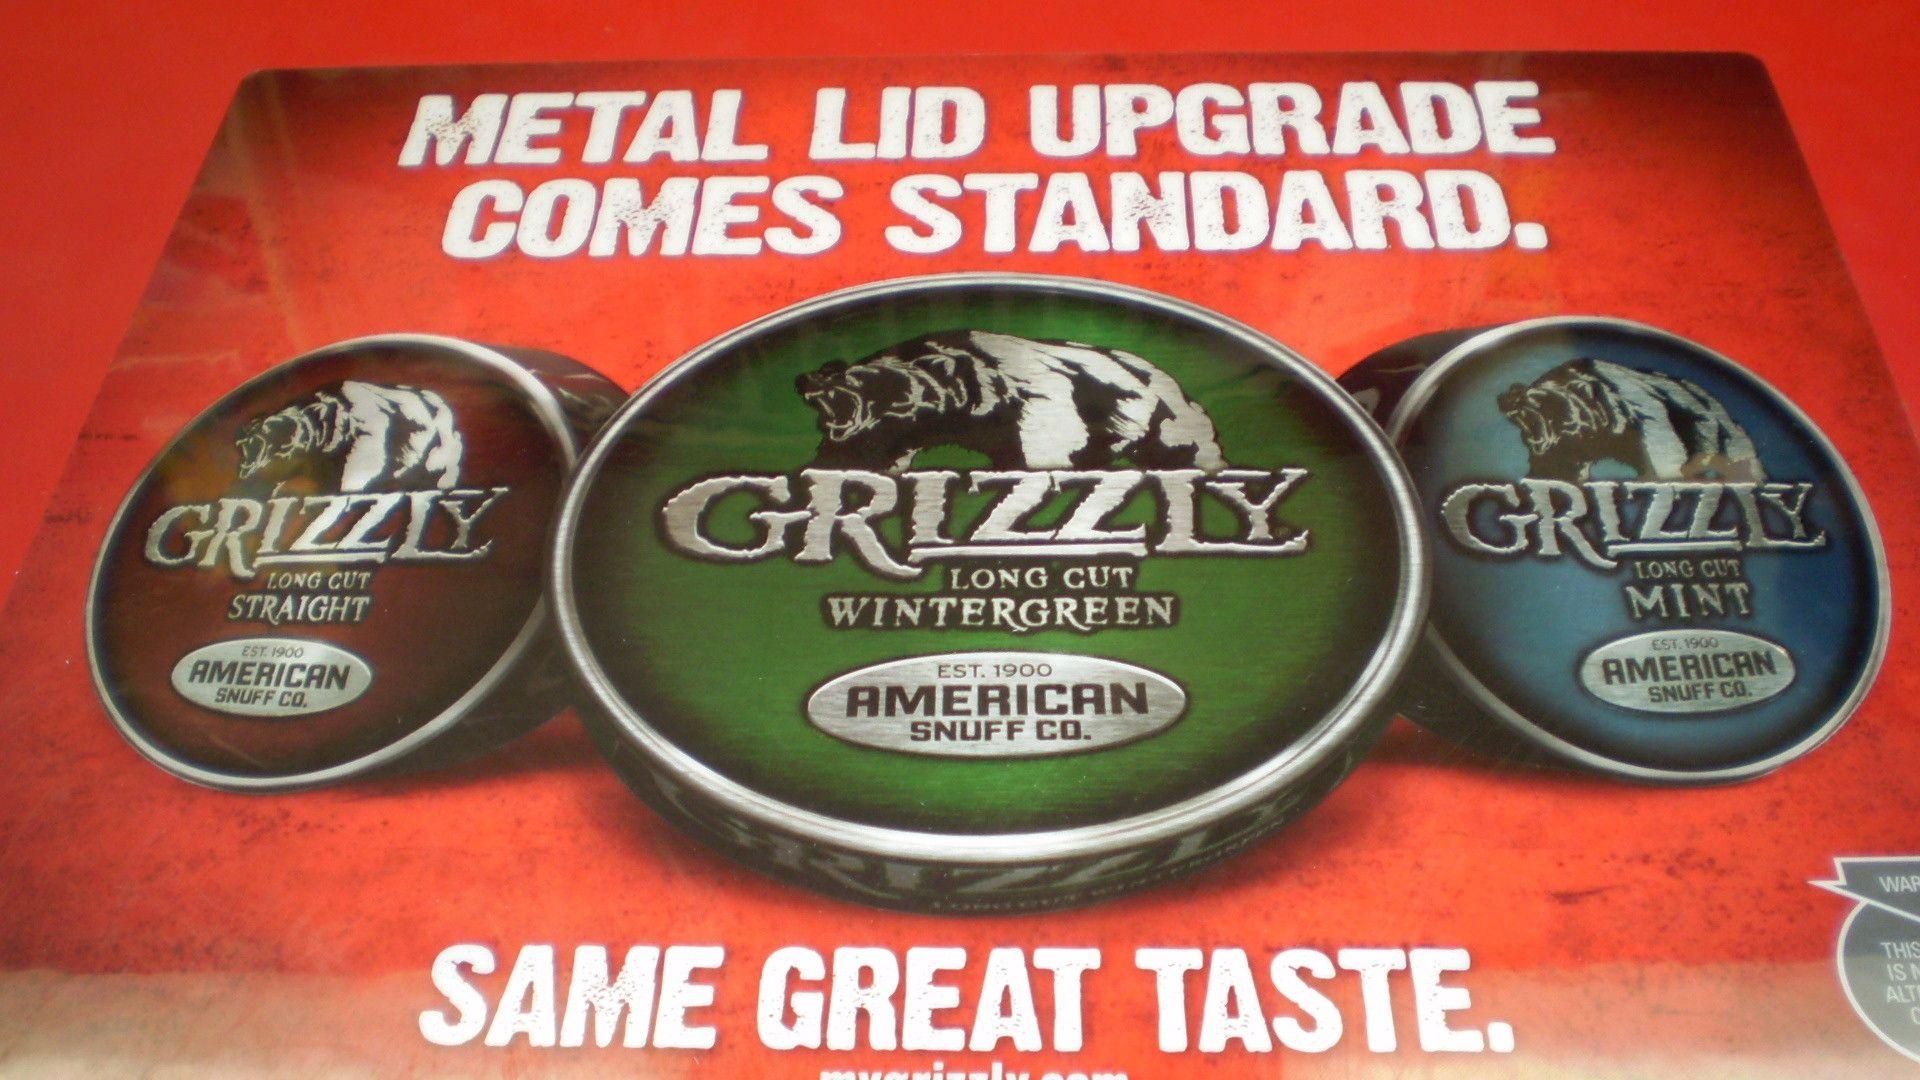 Grizzly Tobacco Wallpaper